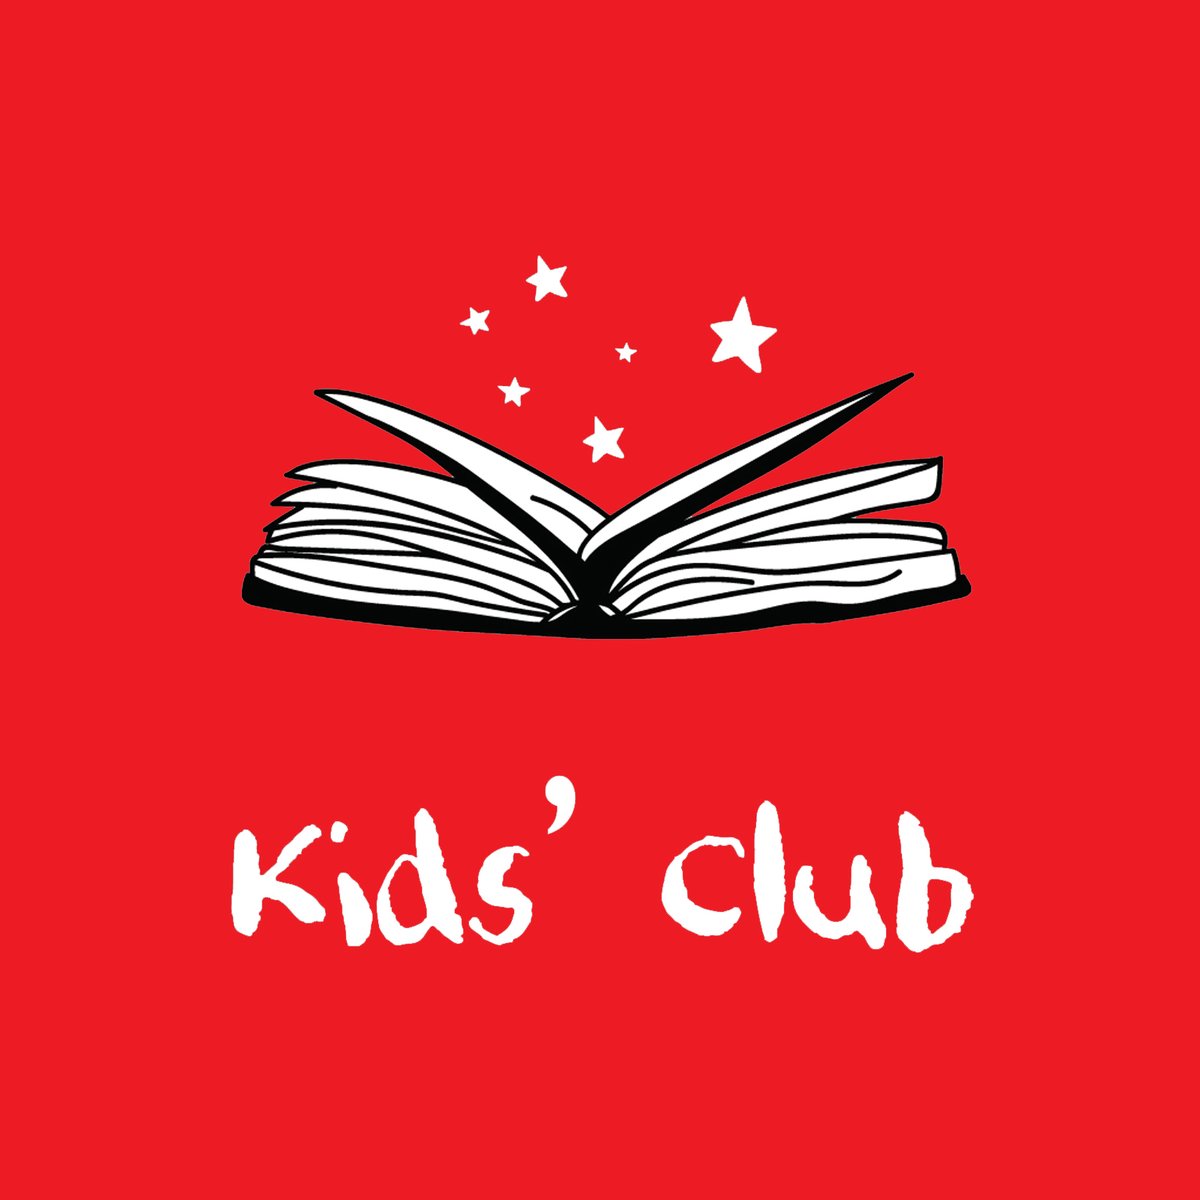 Have you tried our April Kids’ Club yet? This month includes activities based on @carliesorosiak's Shadow Fox for the budding young writers in your life✨ Join the club today📝: ow.ly/gaSC50Rn15O